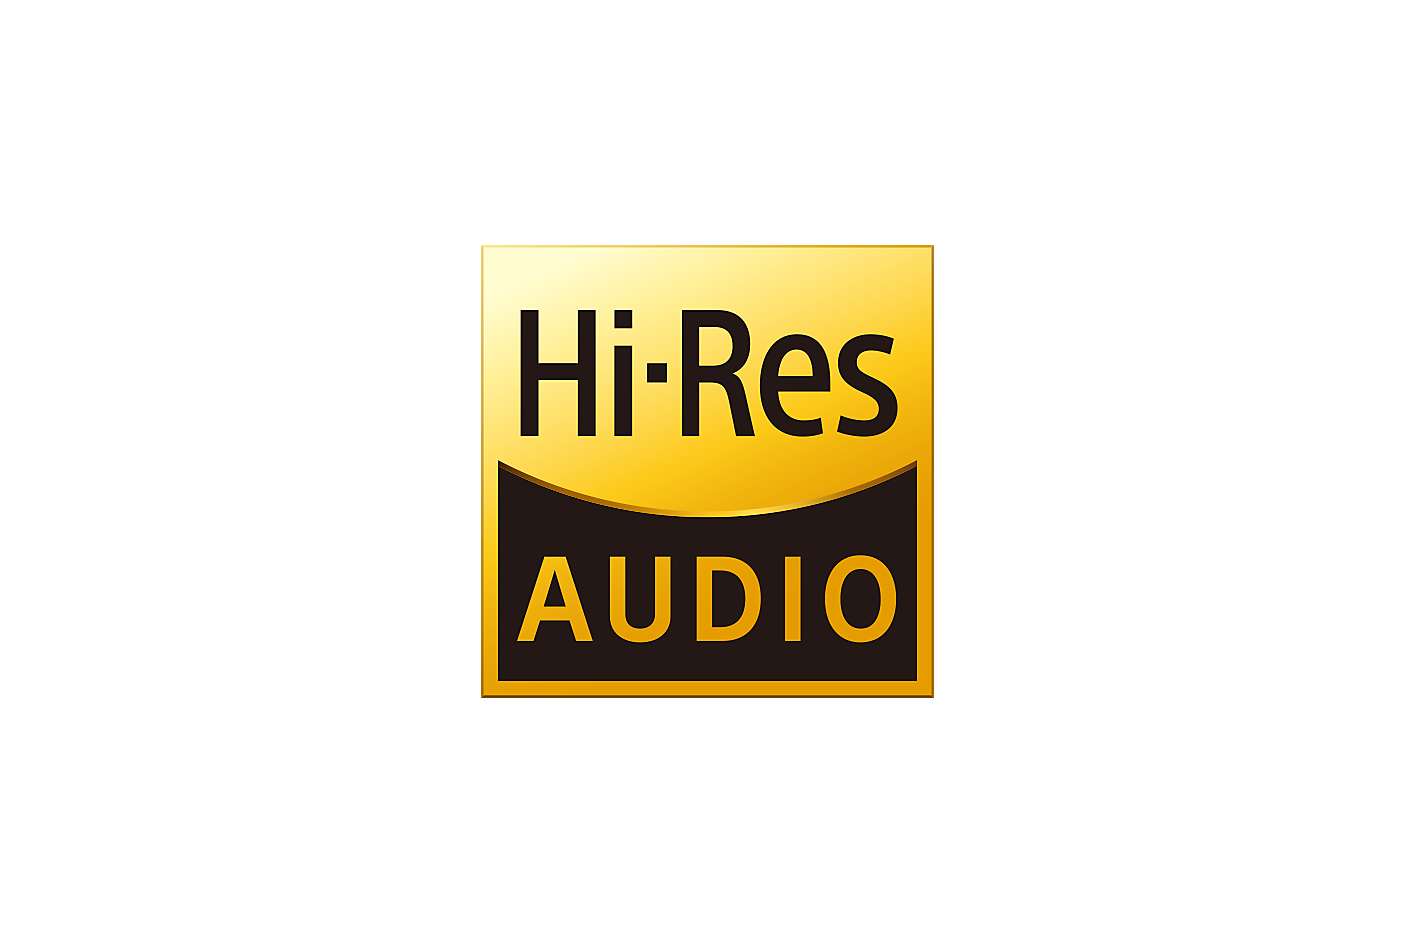 An image of the High-Res Audio logo.